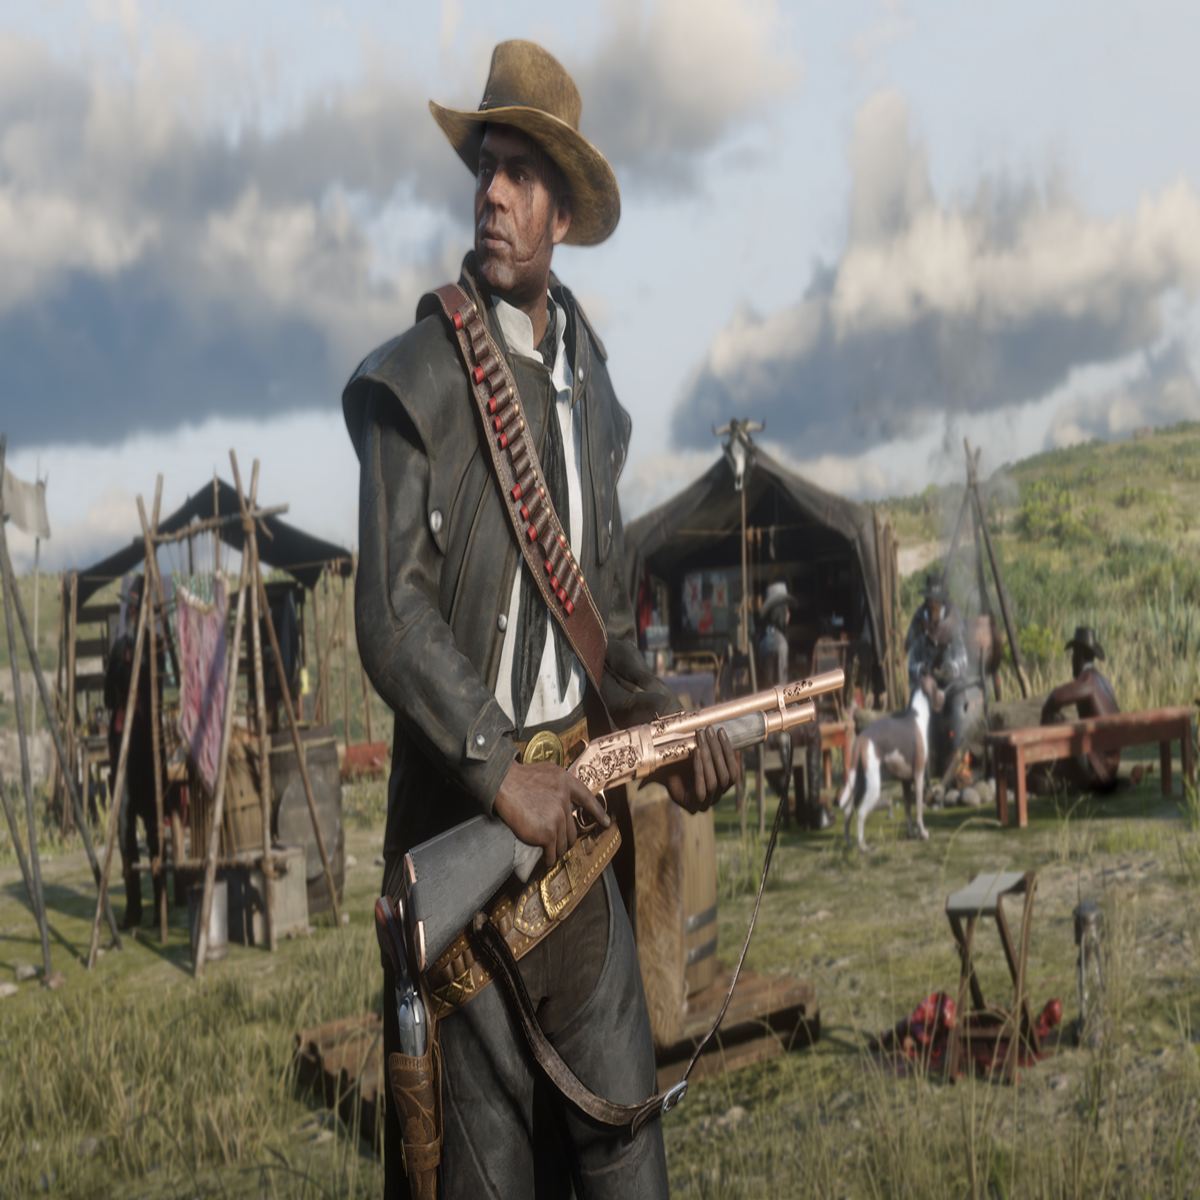 Red Dead Online' Expands With New Modes, Weapons, and Clothing Items